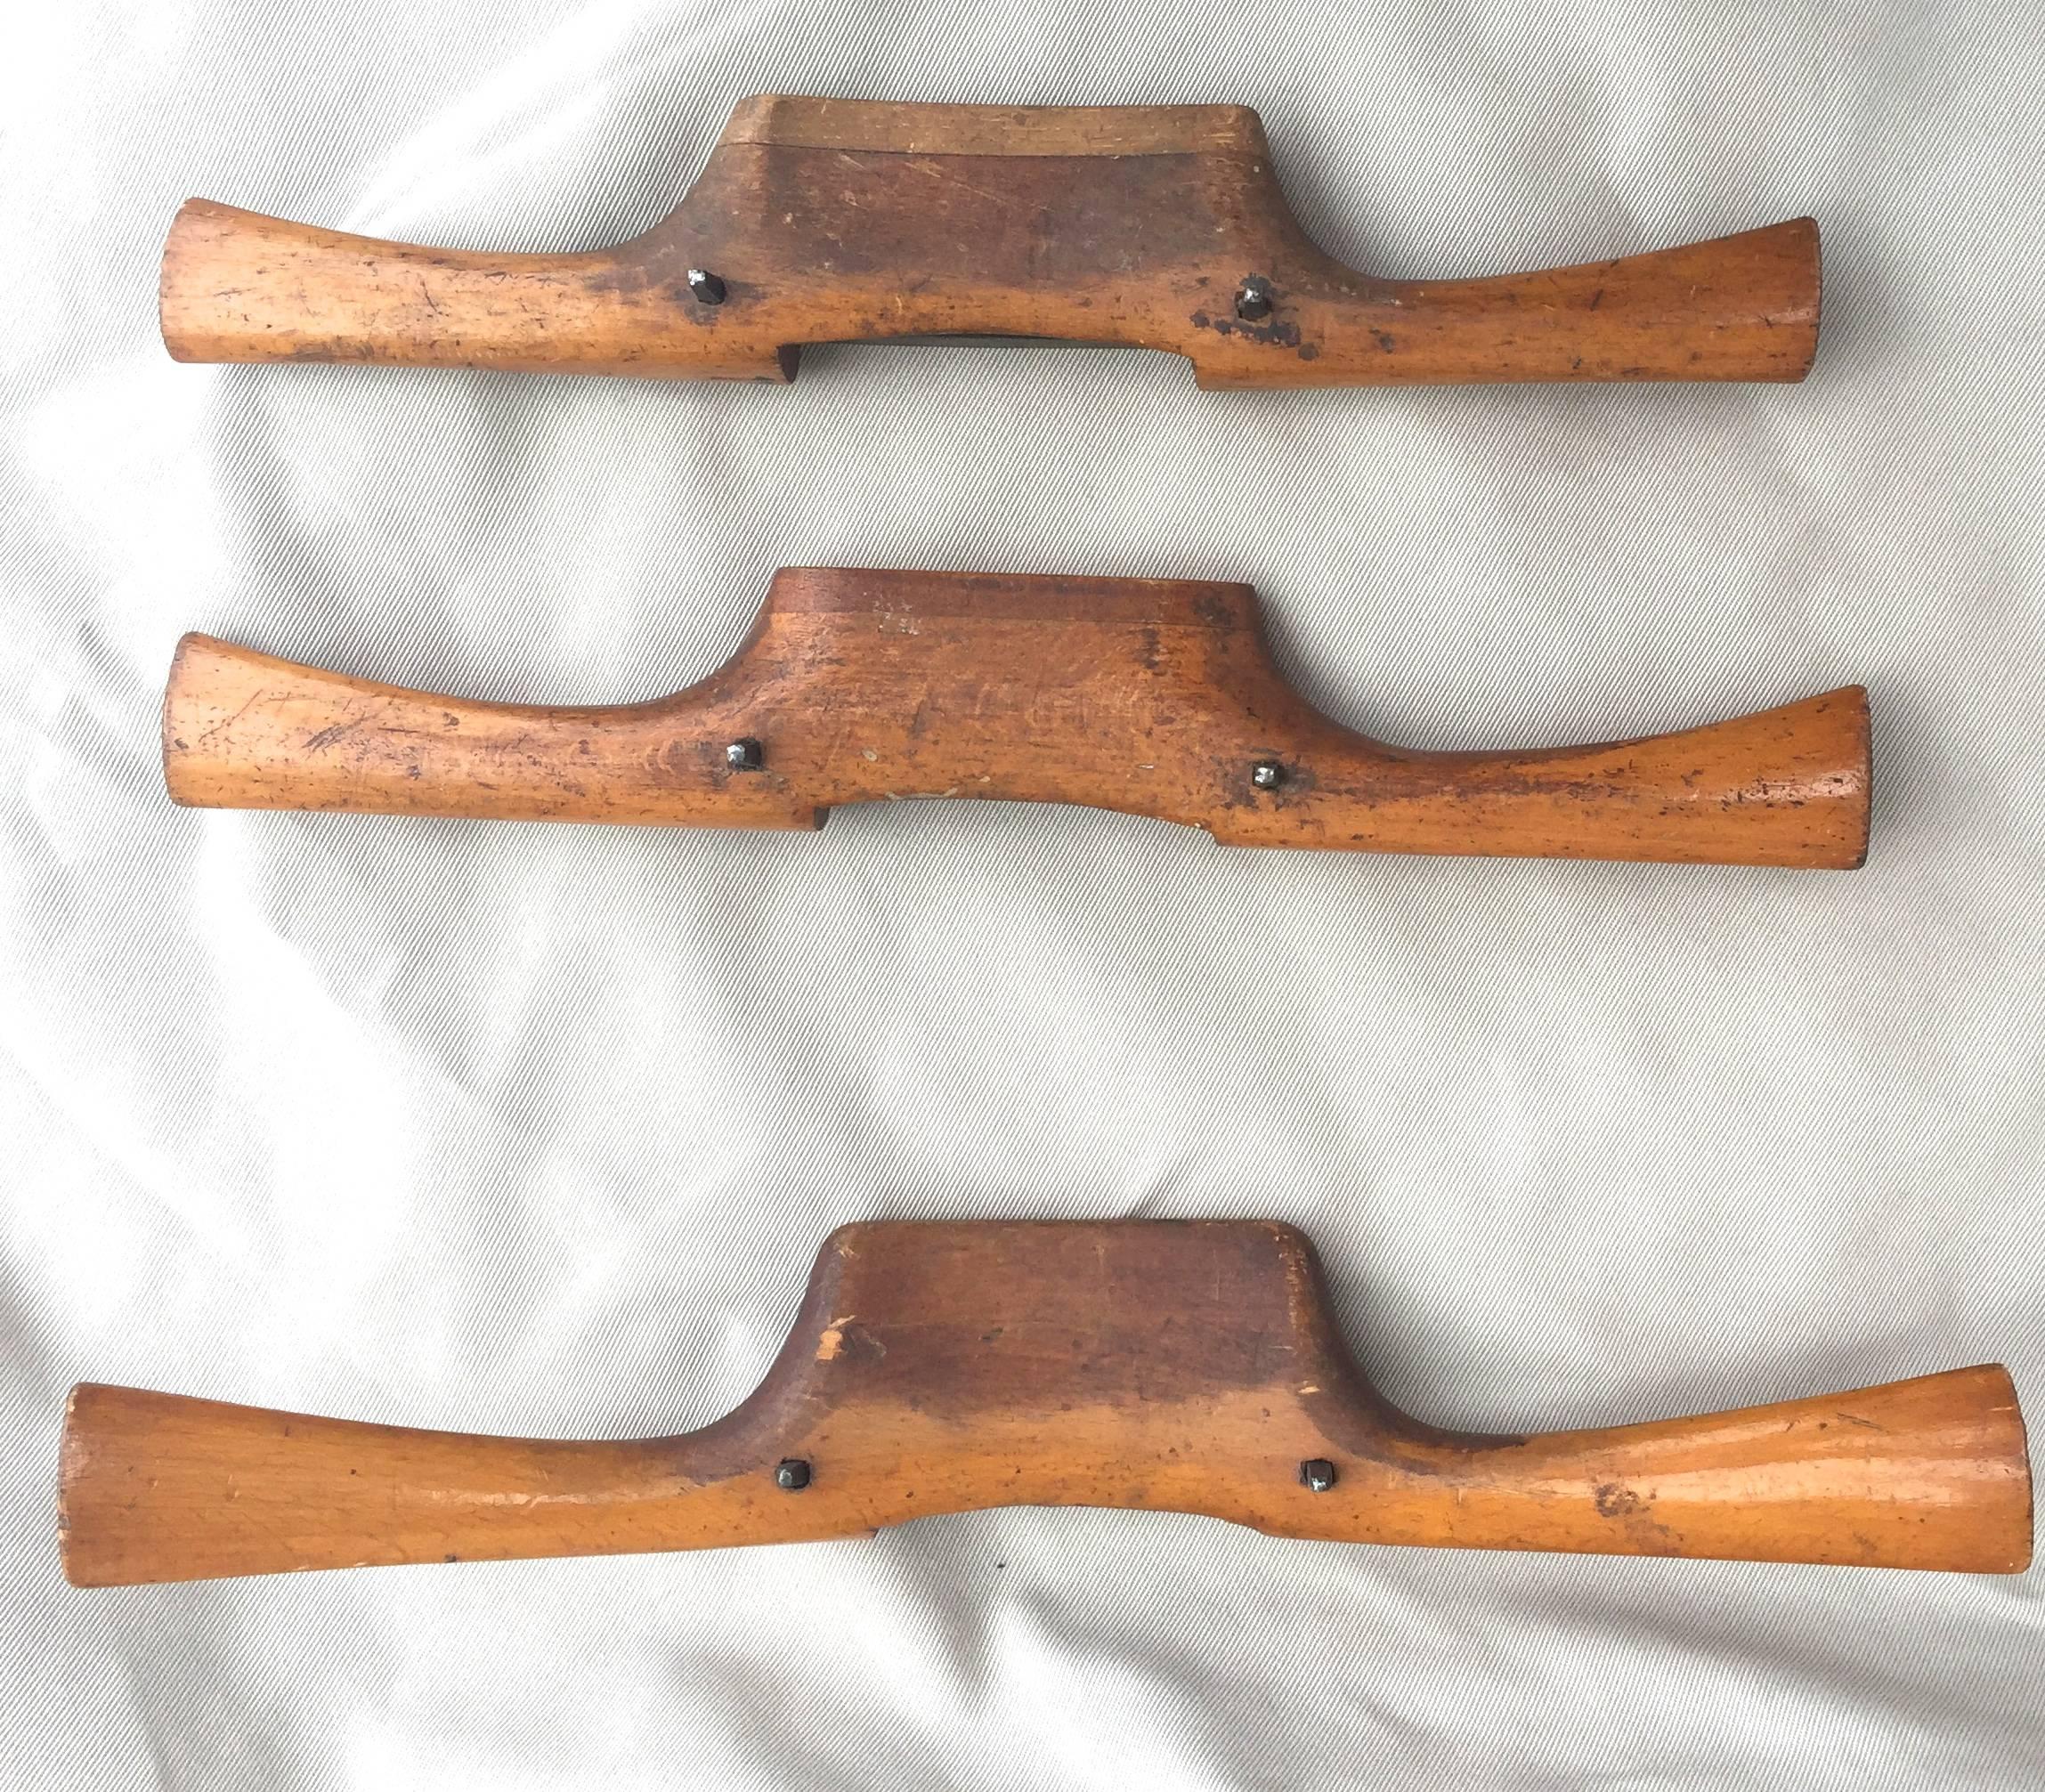 Three 19th century spokeshaves manufactured by Flather and Sons Sheffield England and retailed by Irving Row Warren St NYC. One has owner's initials carved into it. They are in sharpened usable condition.
A spokeshave is a tool used to shape and